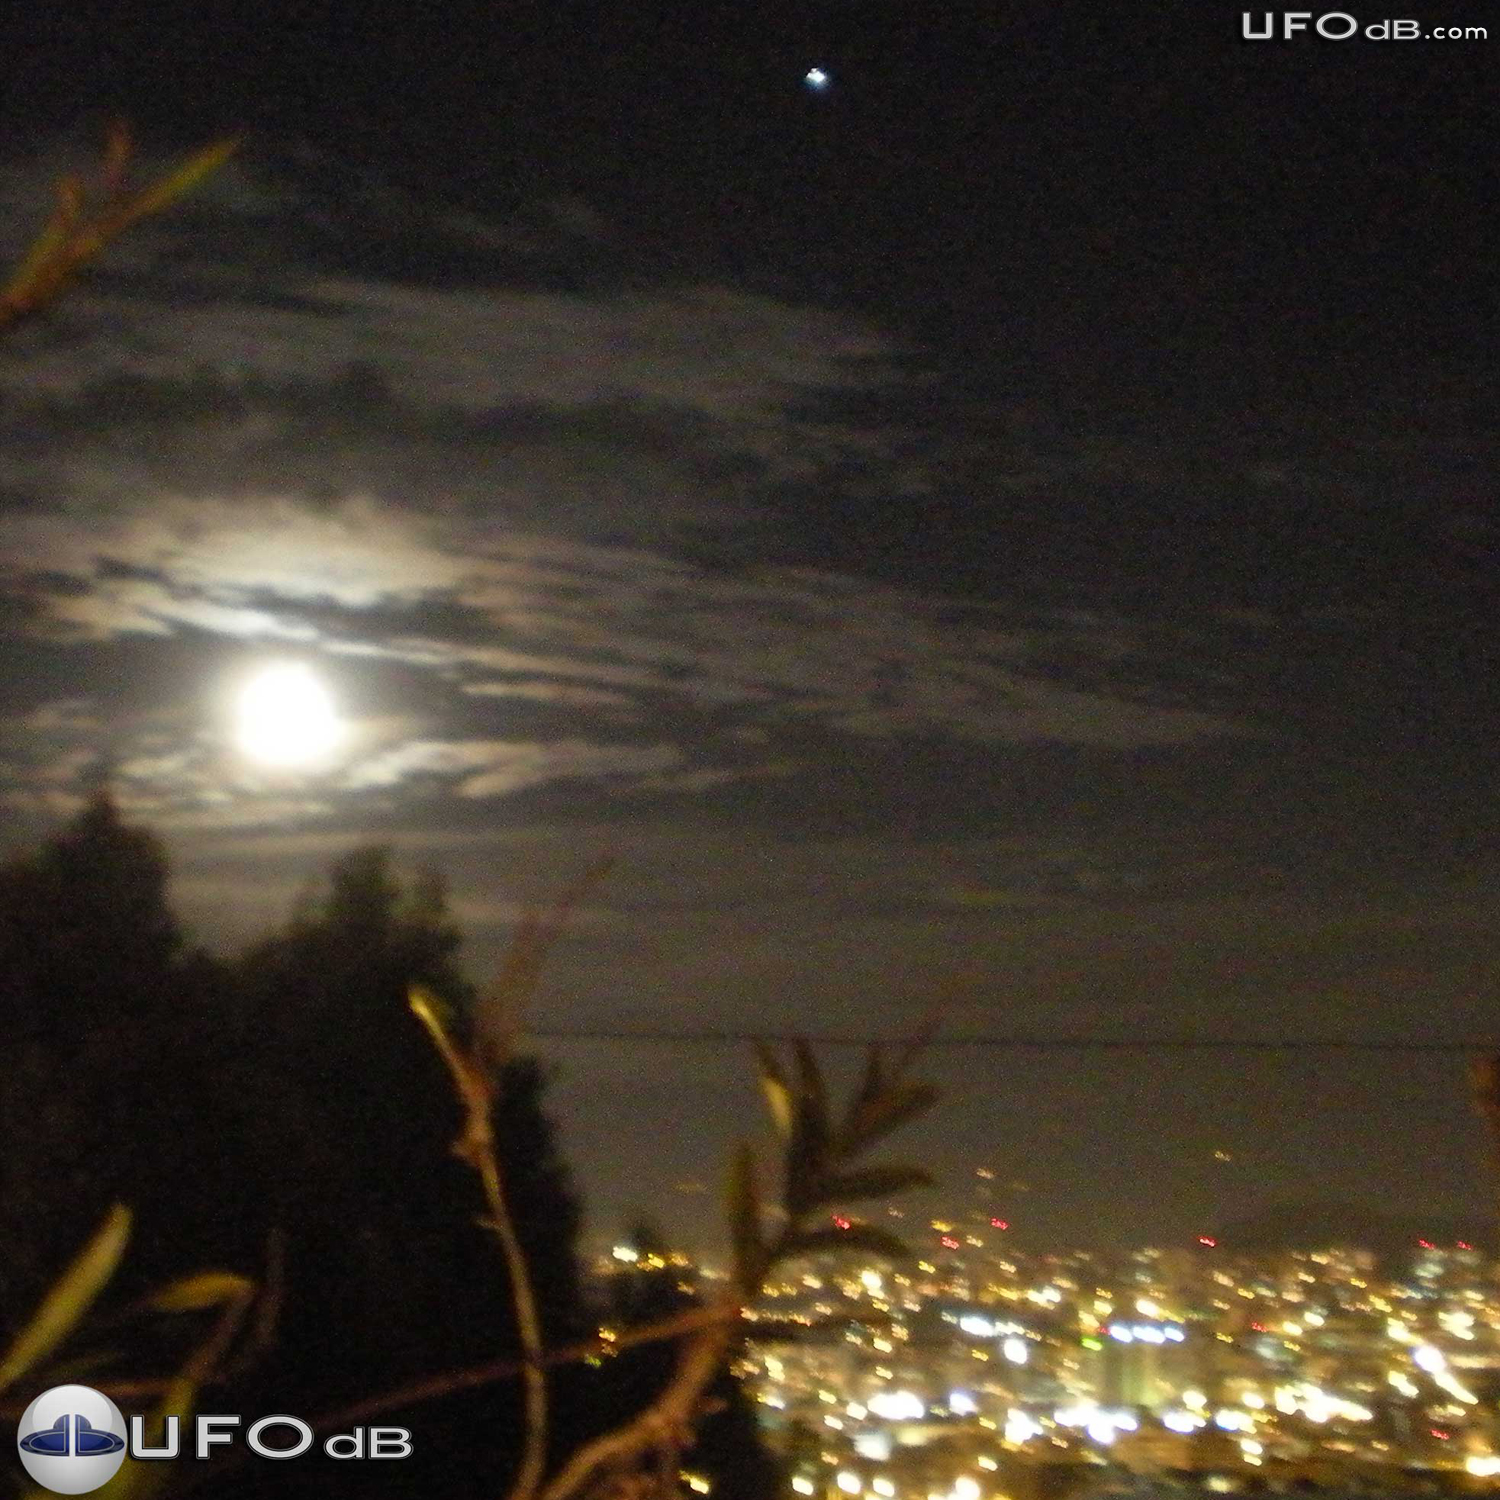 Moon picture captures bright white glowing UFO over a city in Ecuador UFO Picture #352-1